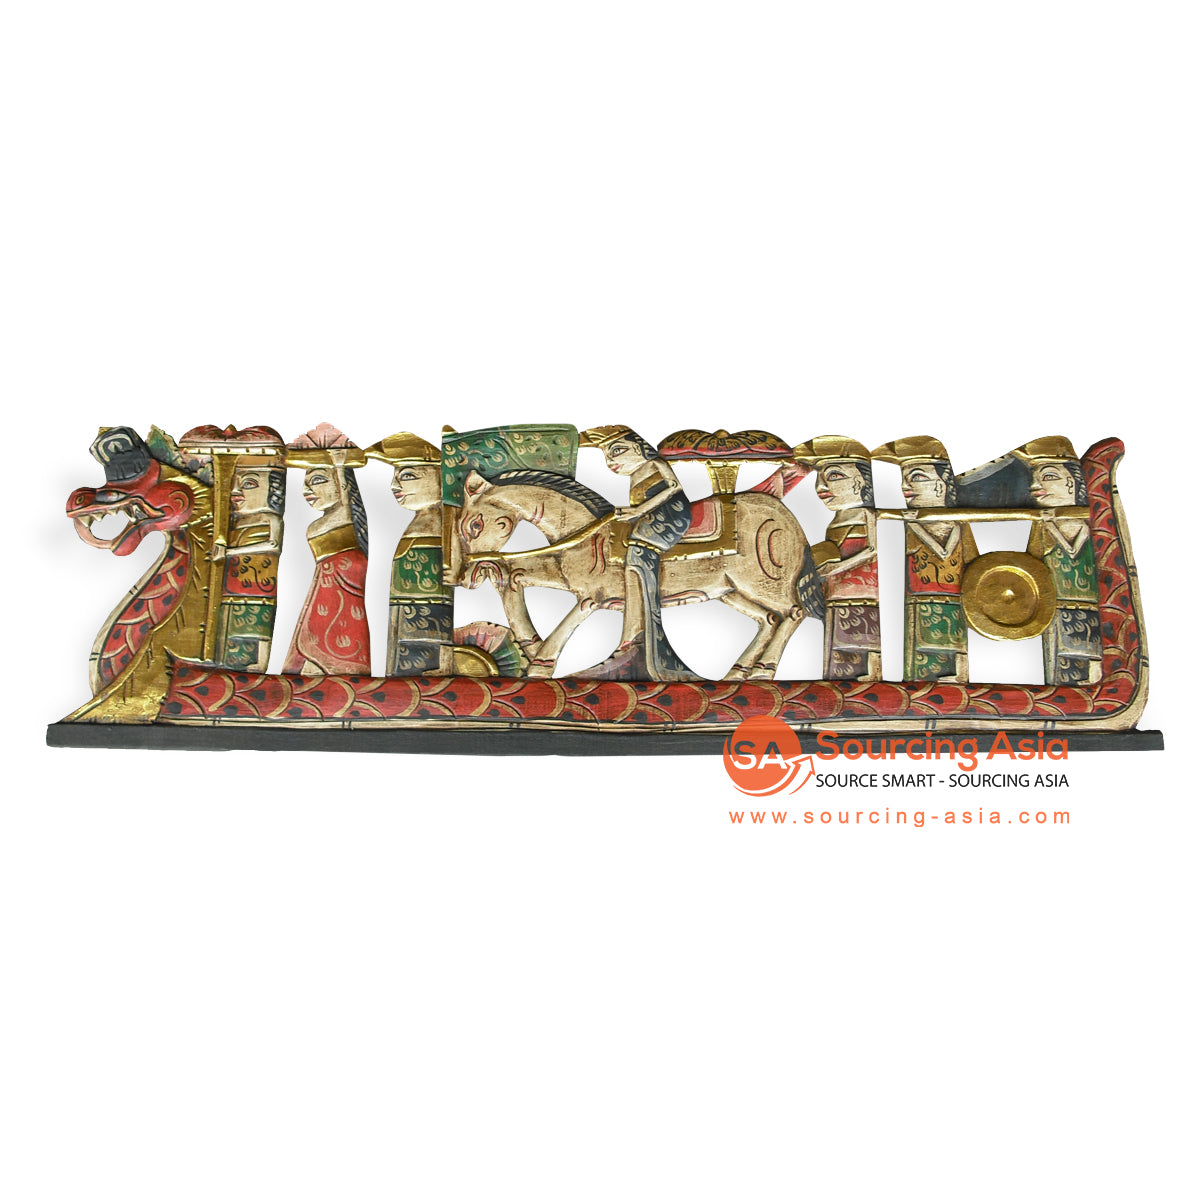 DEW022 WOODEN DRAGON PANEL WITH MELASTI TRADITION WALL DECORATION